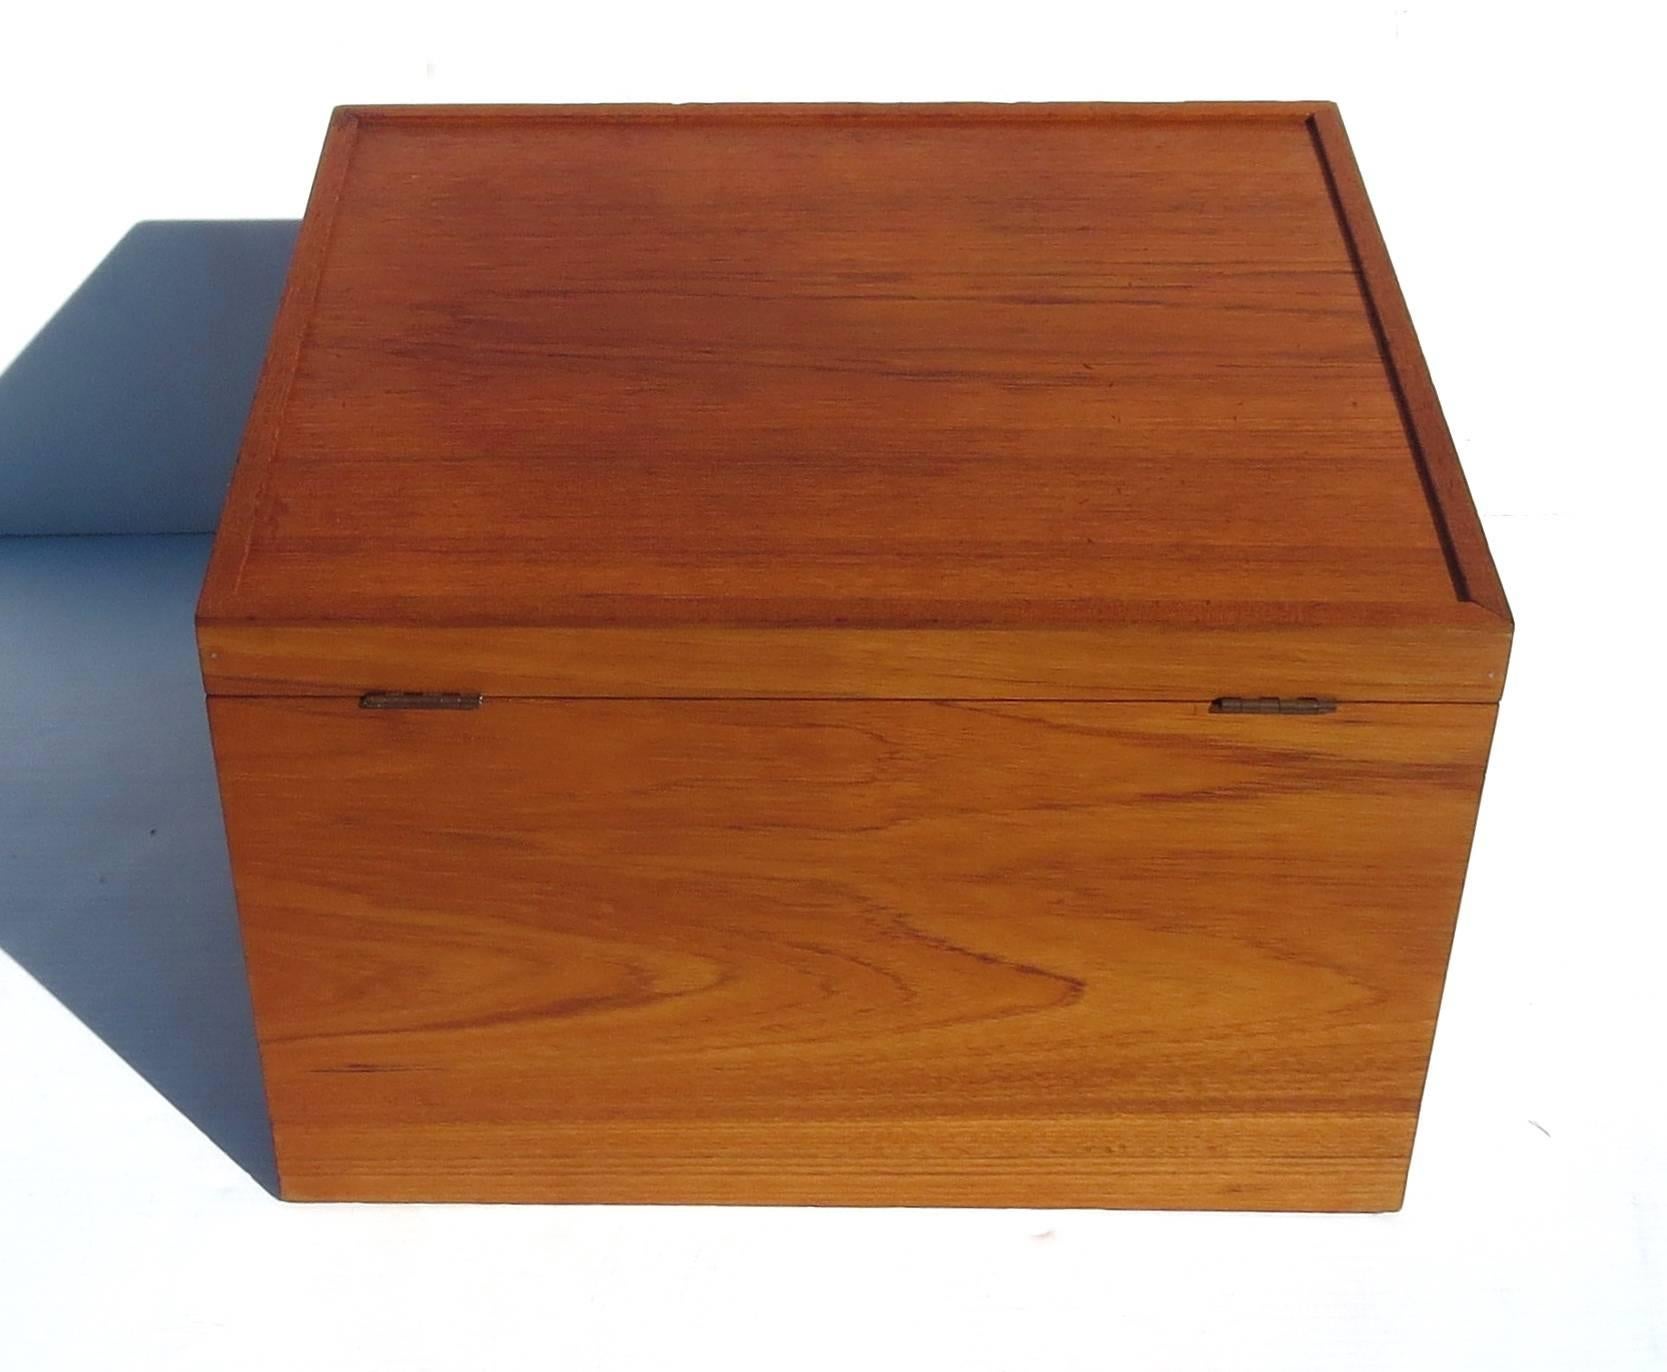 Beautiful wood on this solid teak rare file cabinet box, designed by Poul Hundevad circa 1960s, with side handles and leather strap to hold the lid when opened. Freshly refinished and in great condition.